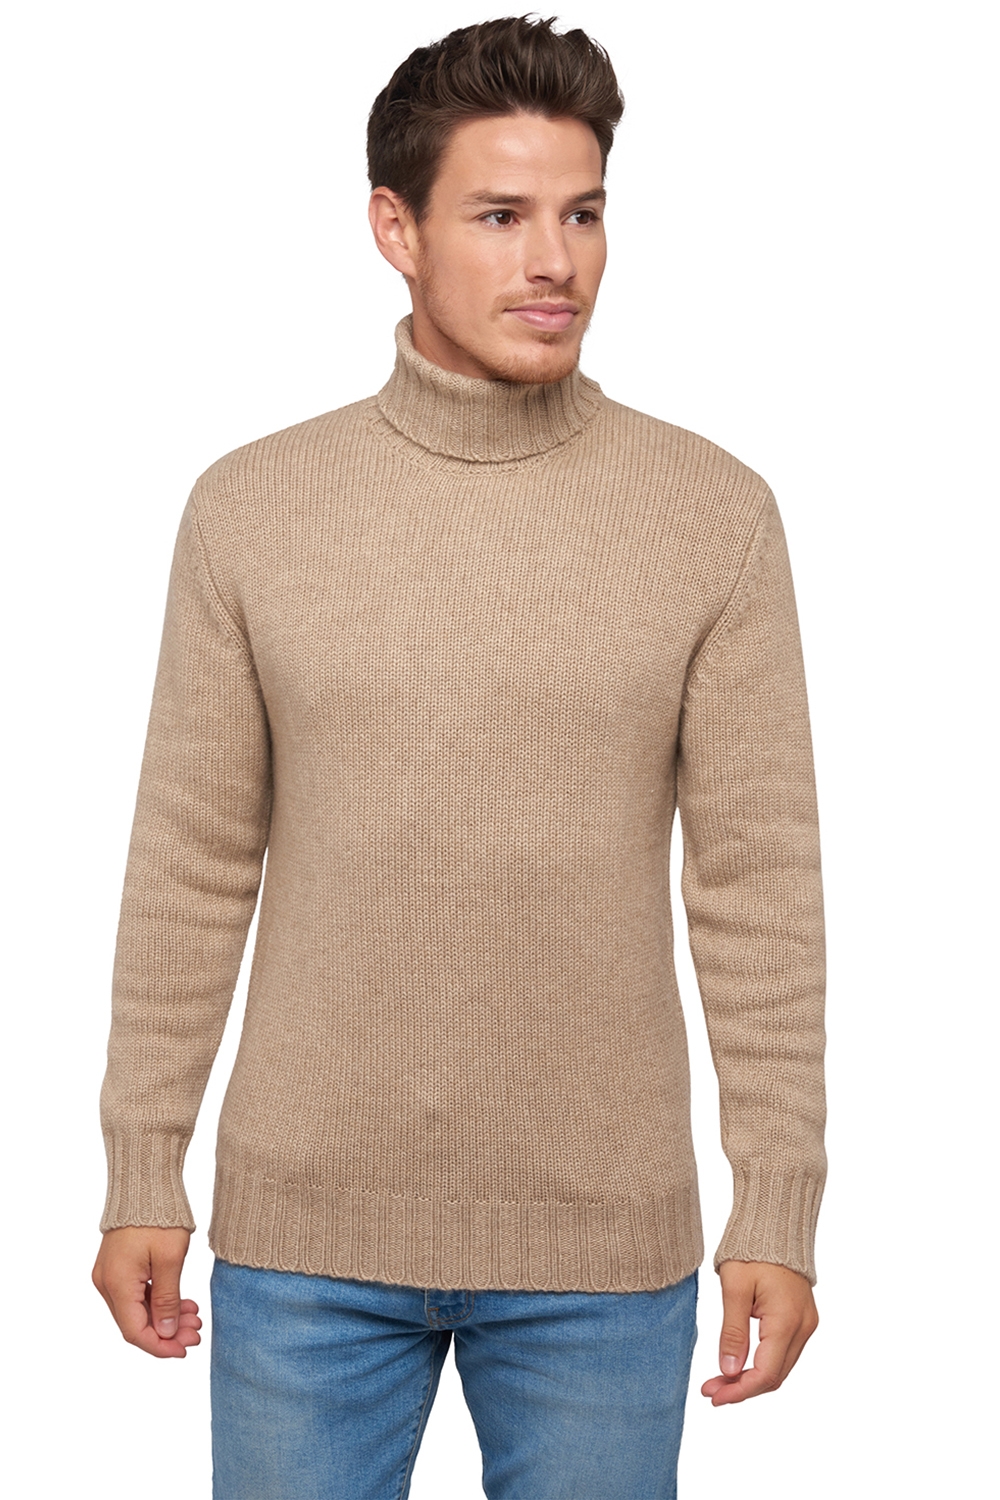 Cachemire Naturel pull homme natural chichi natural brown 3xl